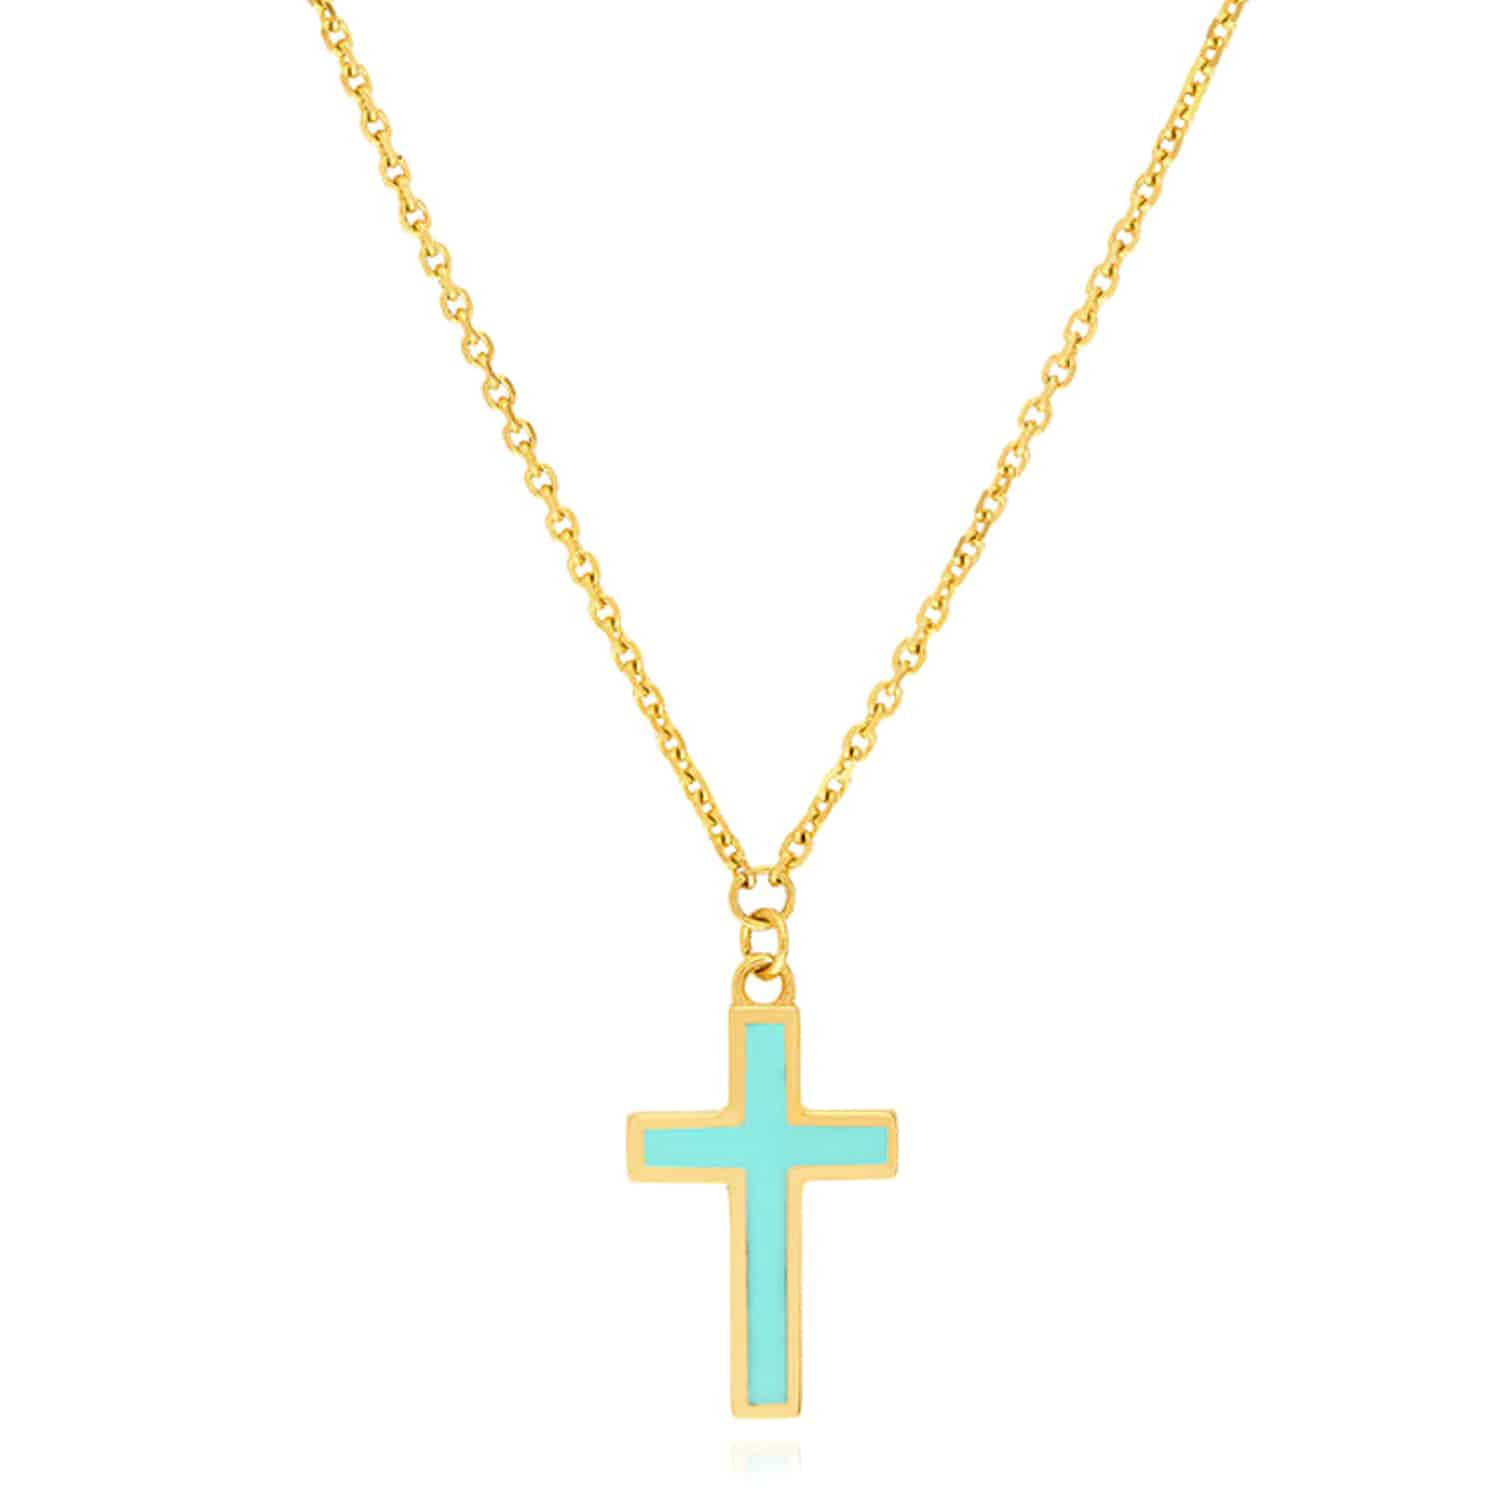 14K Yellow Gold Cable Turquoise Enamel Cross Pendant Necklace 16"-18" Adjustable - Turquoise